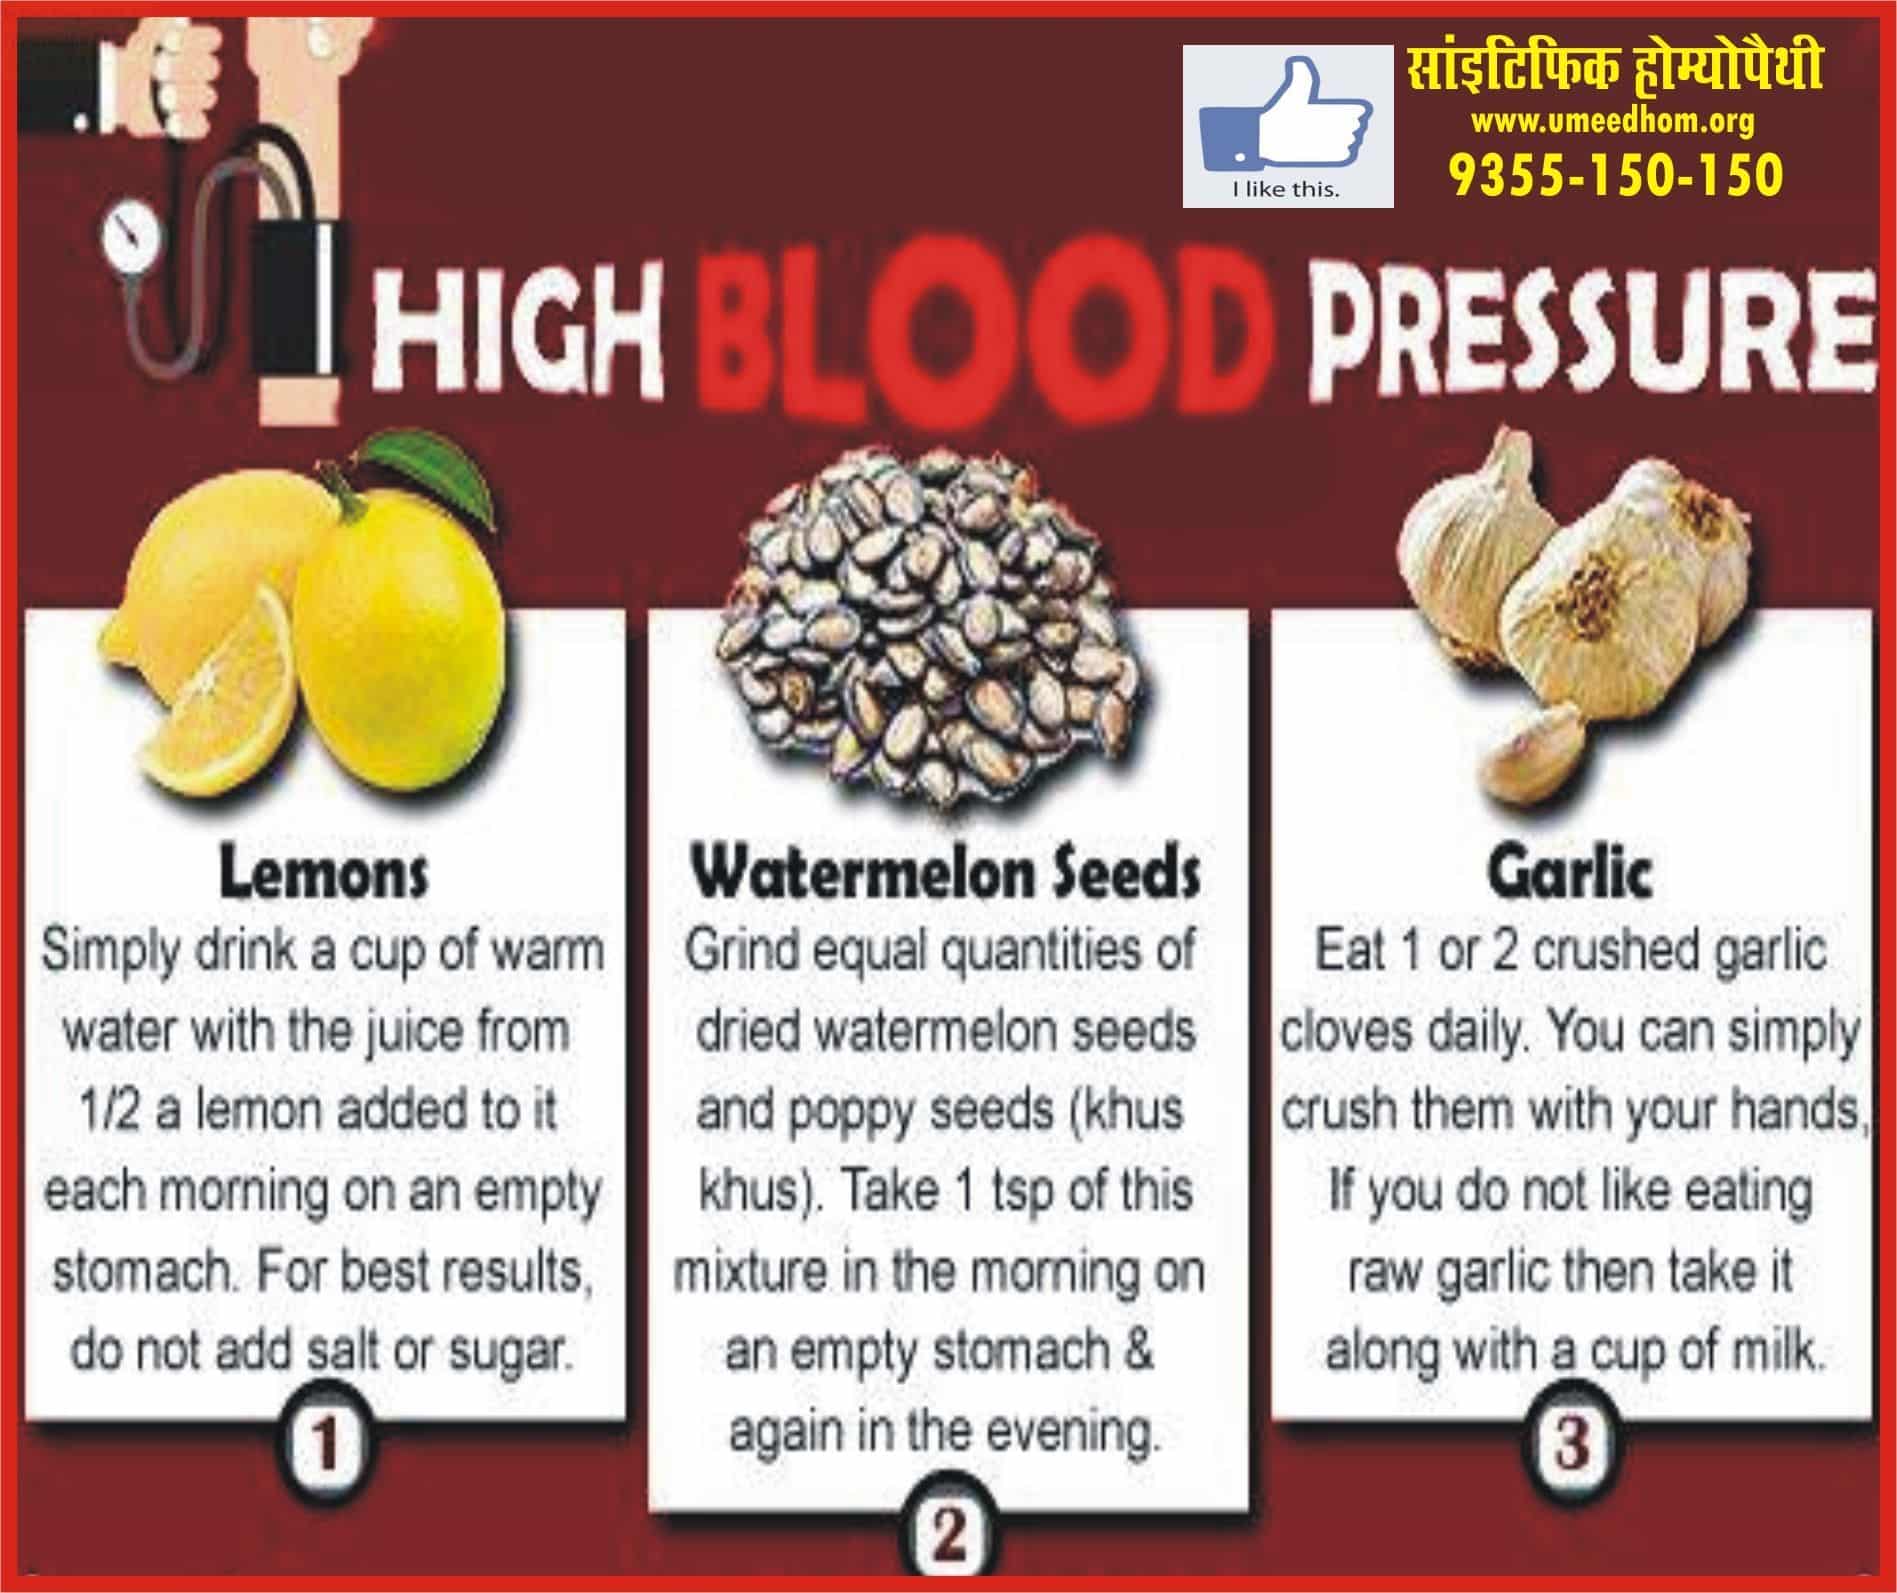 Top 10 Natural Remedies For High Blood Pressure